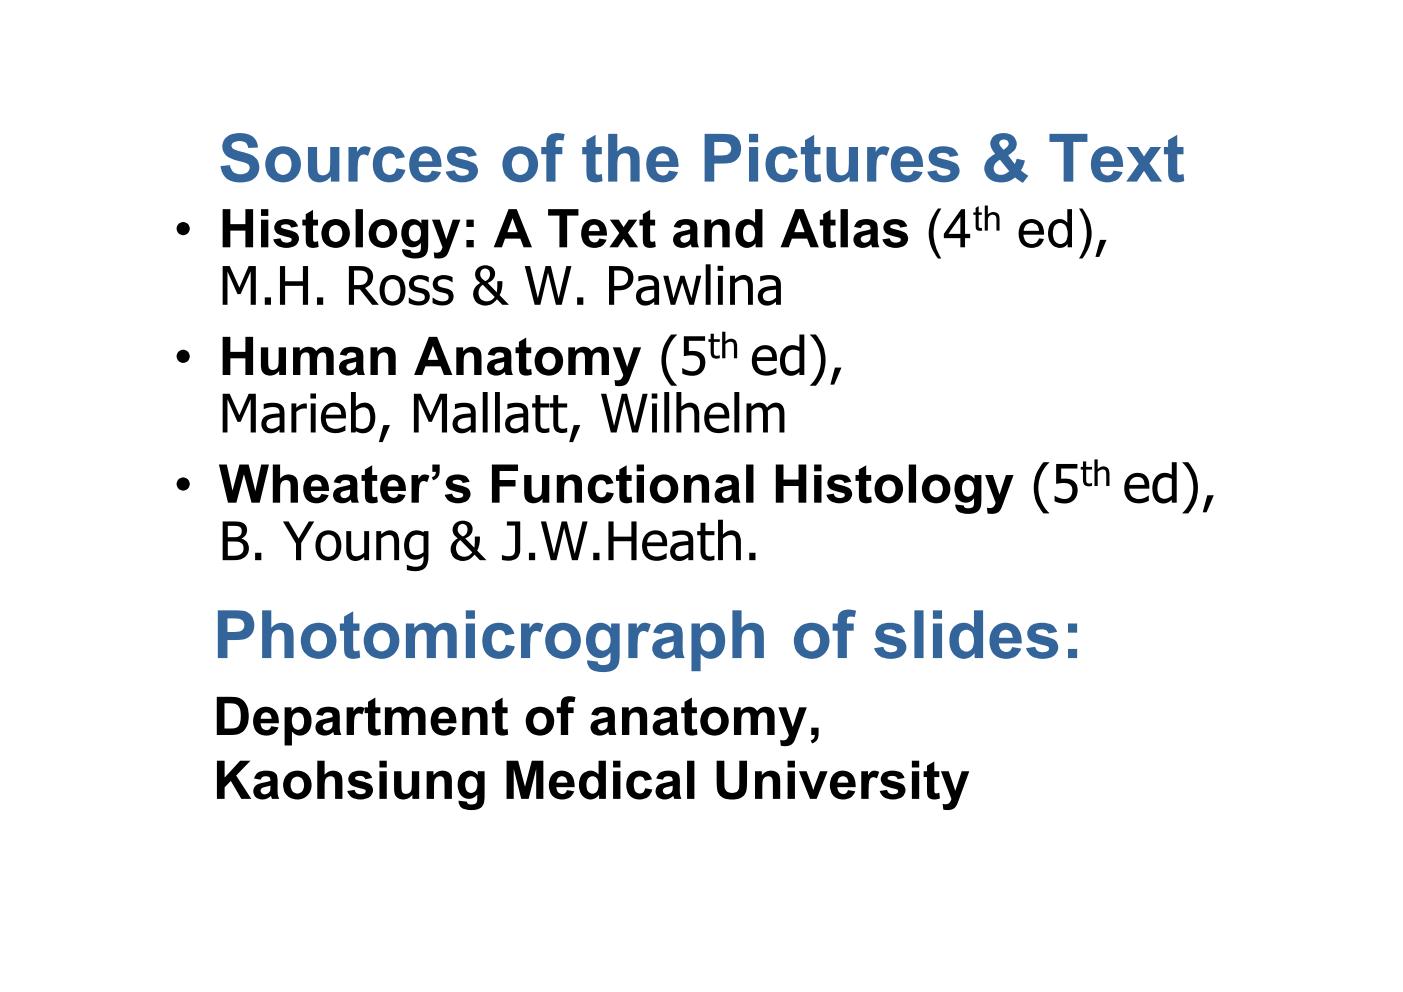 block7_02.jpg - Sources of the Pictures & Text¡E Histology: A Text and Atlas (4th ed),  M.H. Ross & W. Pawlina¡E Human Anatomy (5th ed),  Marieb, Mallatt, Wilhelm¡E Wheater's Functional Histology (5th ed),  B. Young & J.W.Heath. Photomicrograph of slides: Department of anatomy, Kaohsiung Medical University